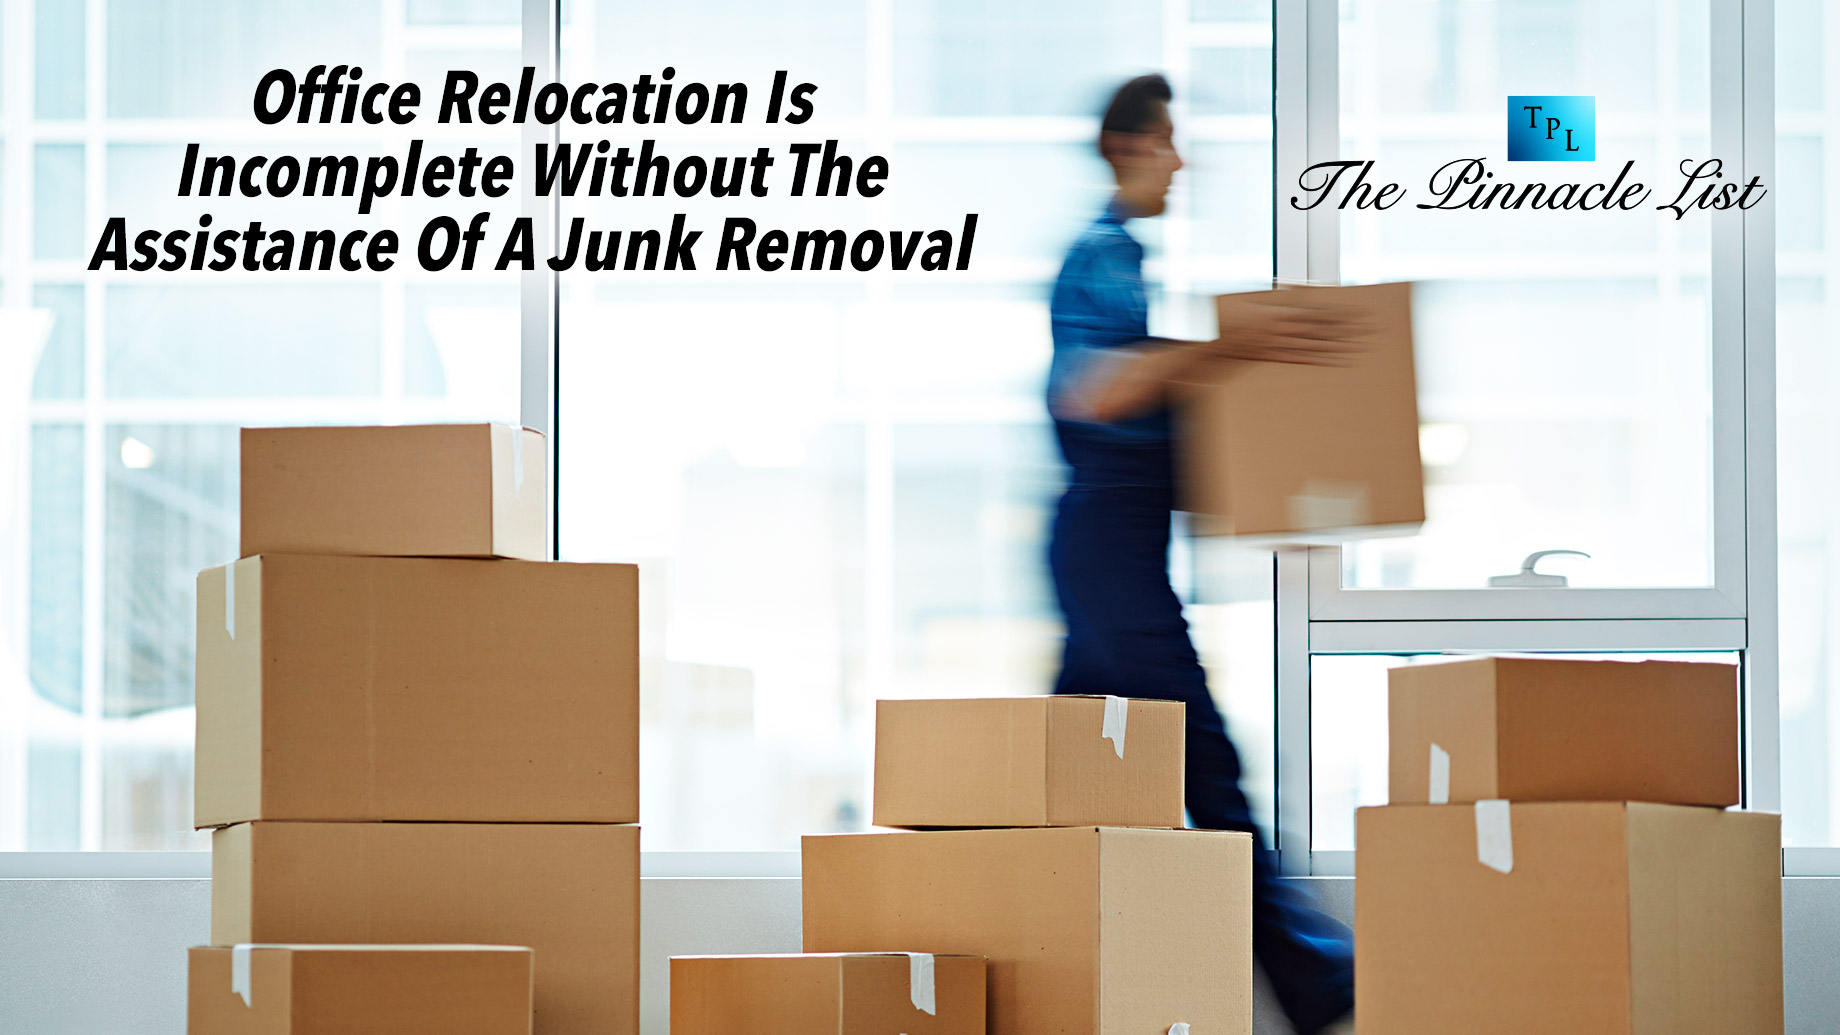 Office Relocation Is Incomplete Without The Assistance Of A Junk Removal Company